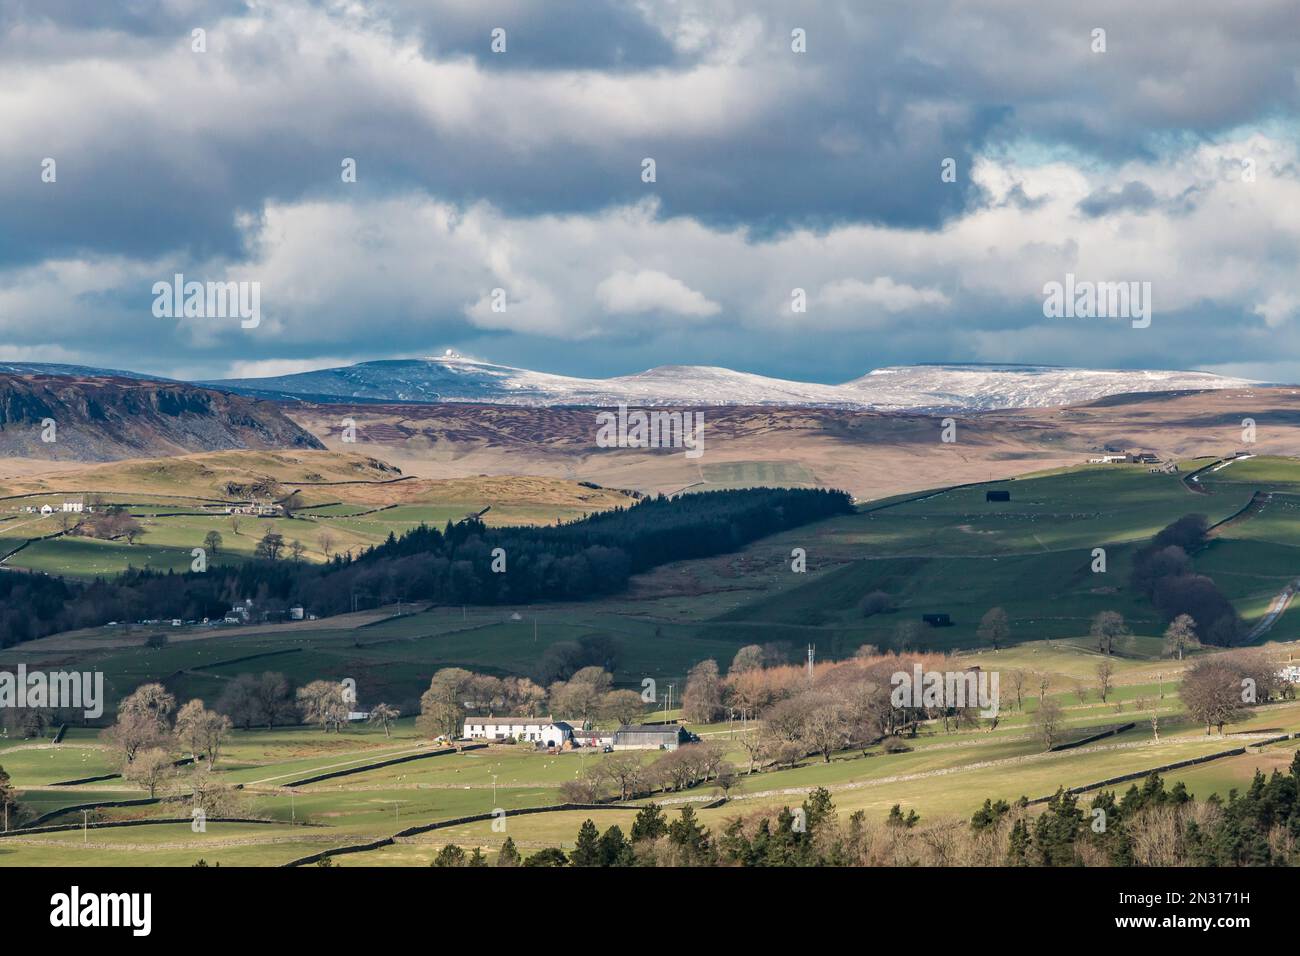 Three Pennine Peaks. Left to right, snow capped Great Dun Fell with radar station, Little Dun Fell and Cross Fell. Stock Photo